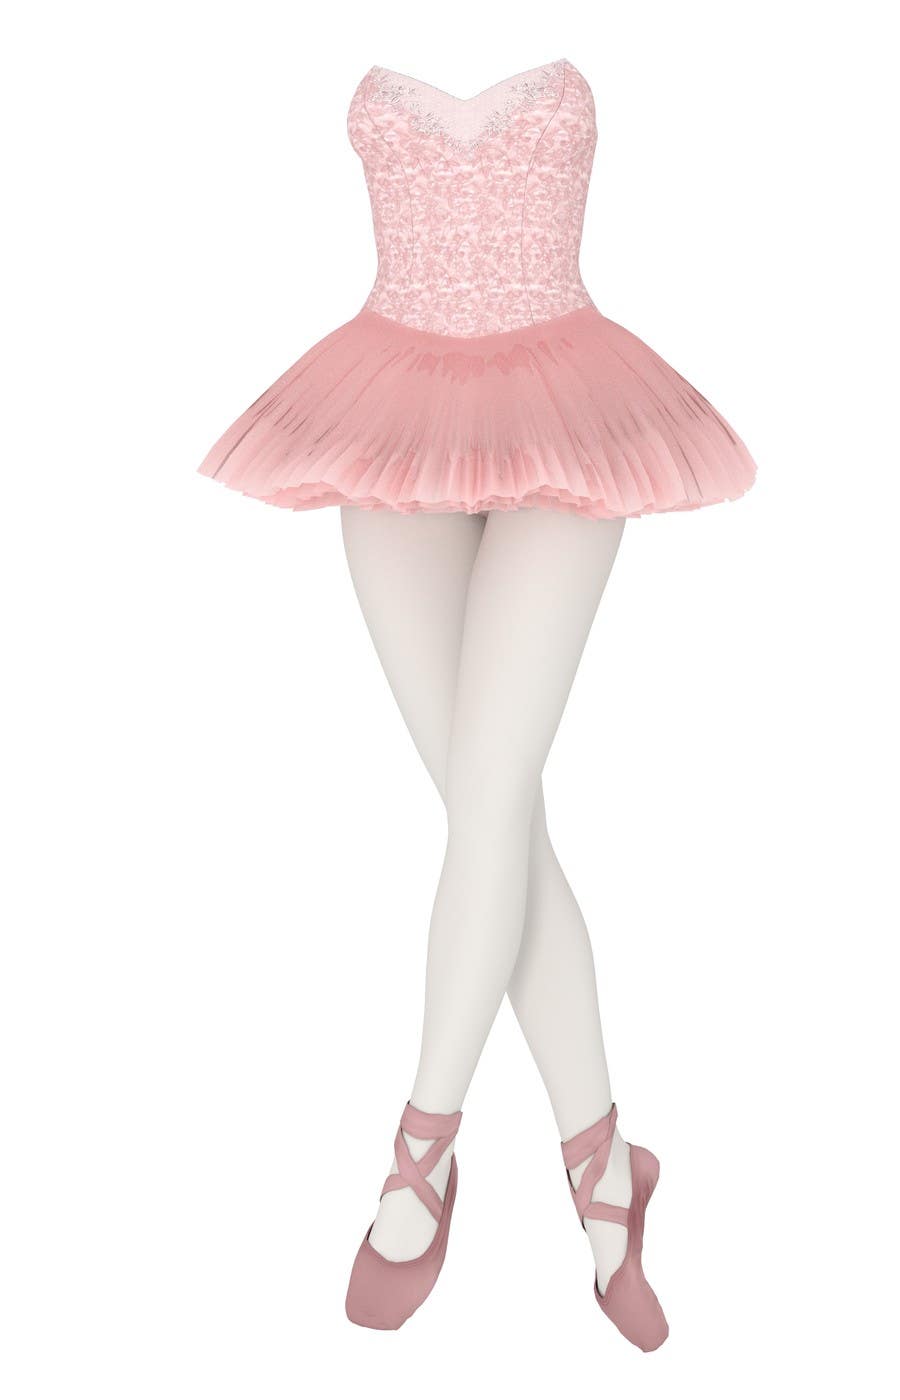 
                                                                                                                        Konkurrenceindlæg #                                            7
                                         for                                             Illustrate a realistic ballet dancer costume and legs for printing
                                        